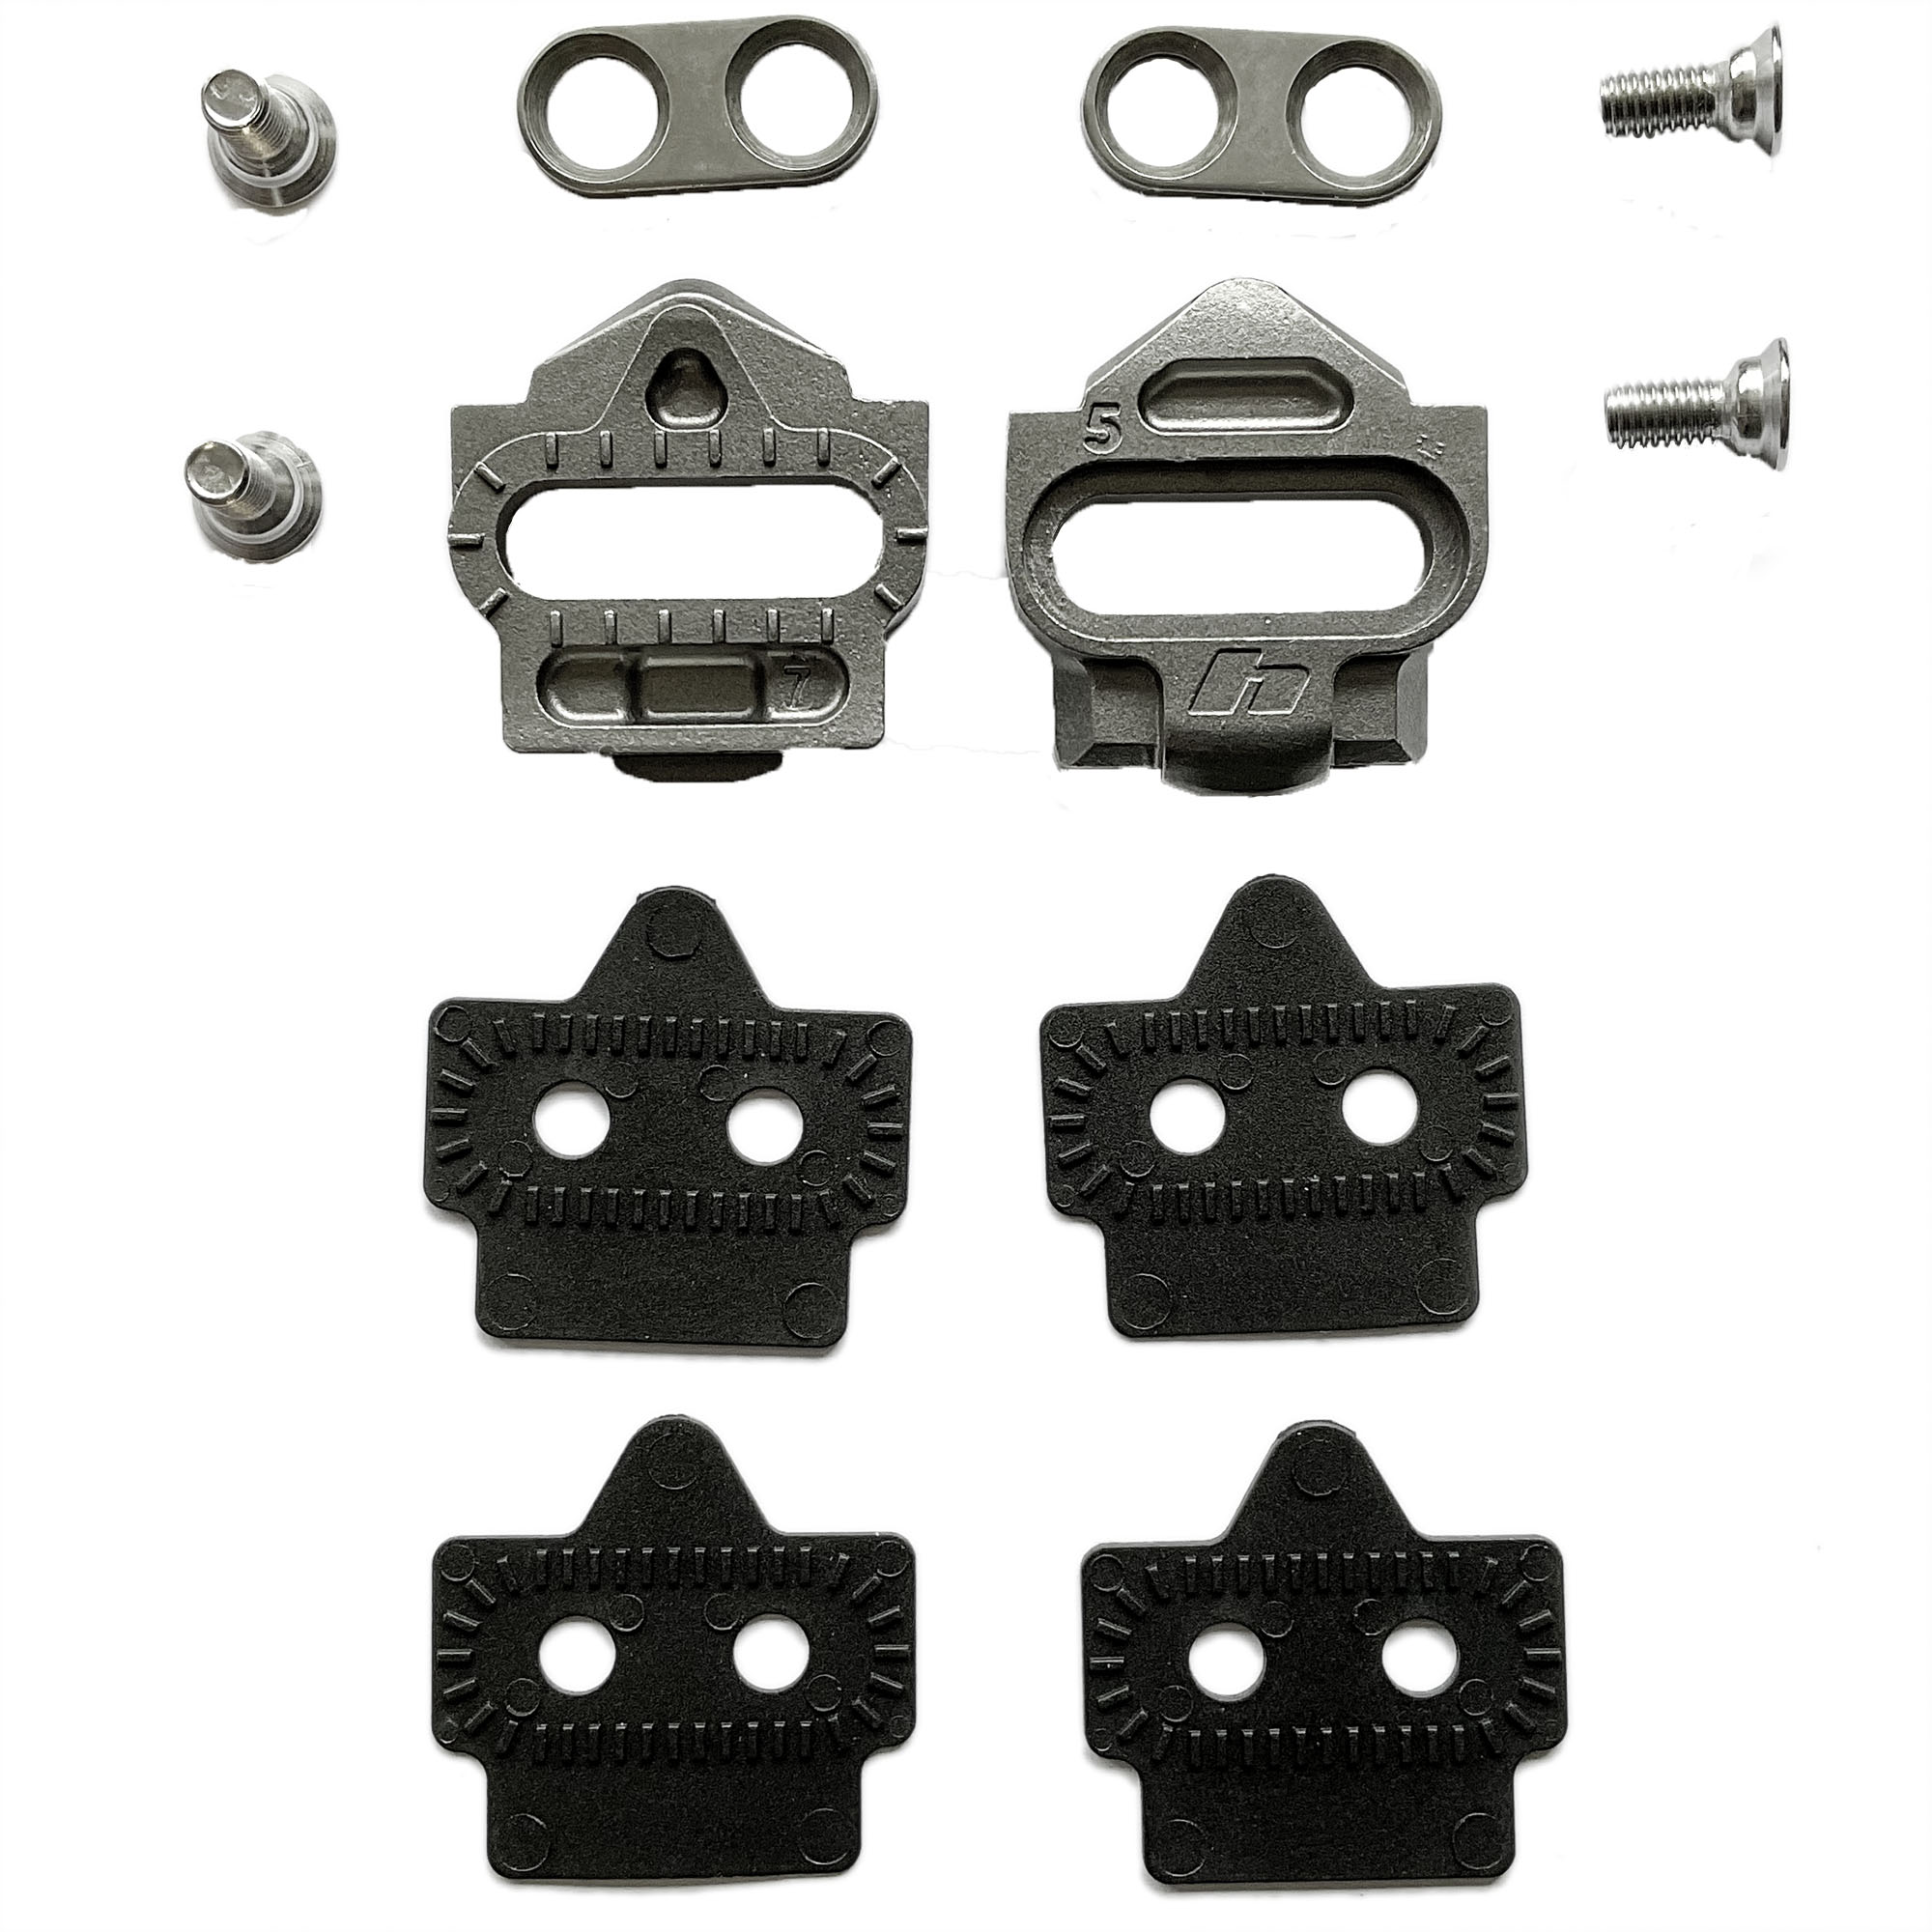 Hope Union Pedal Cleat Kit